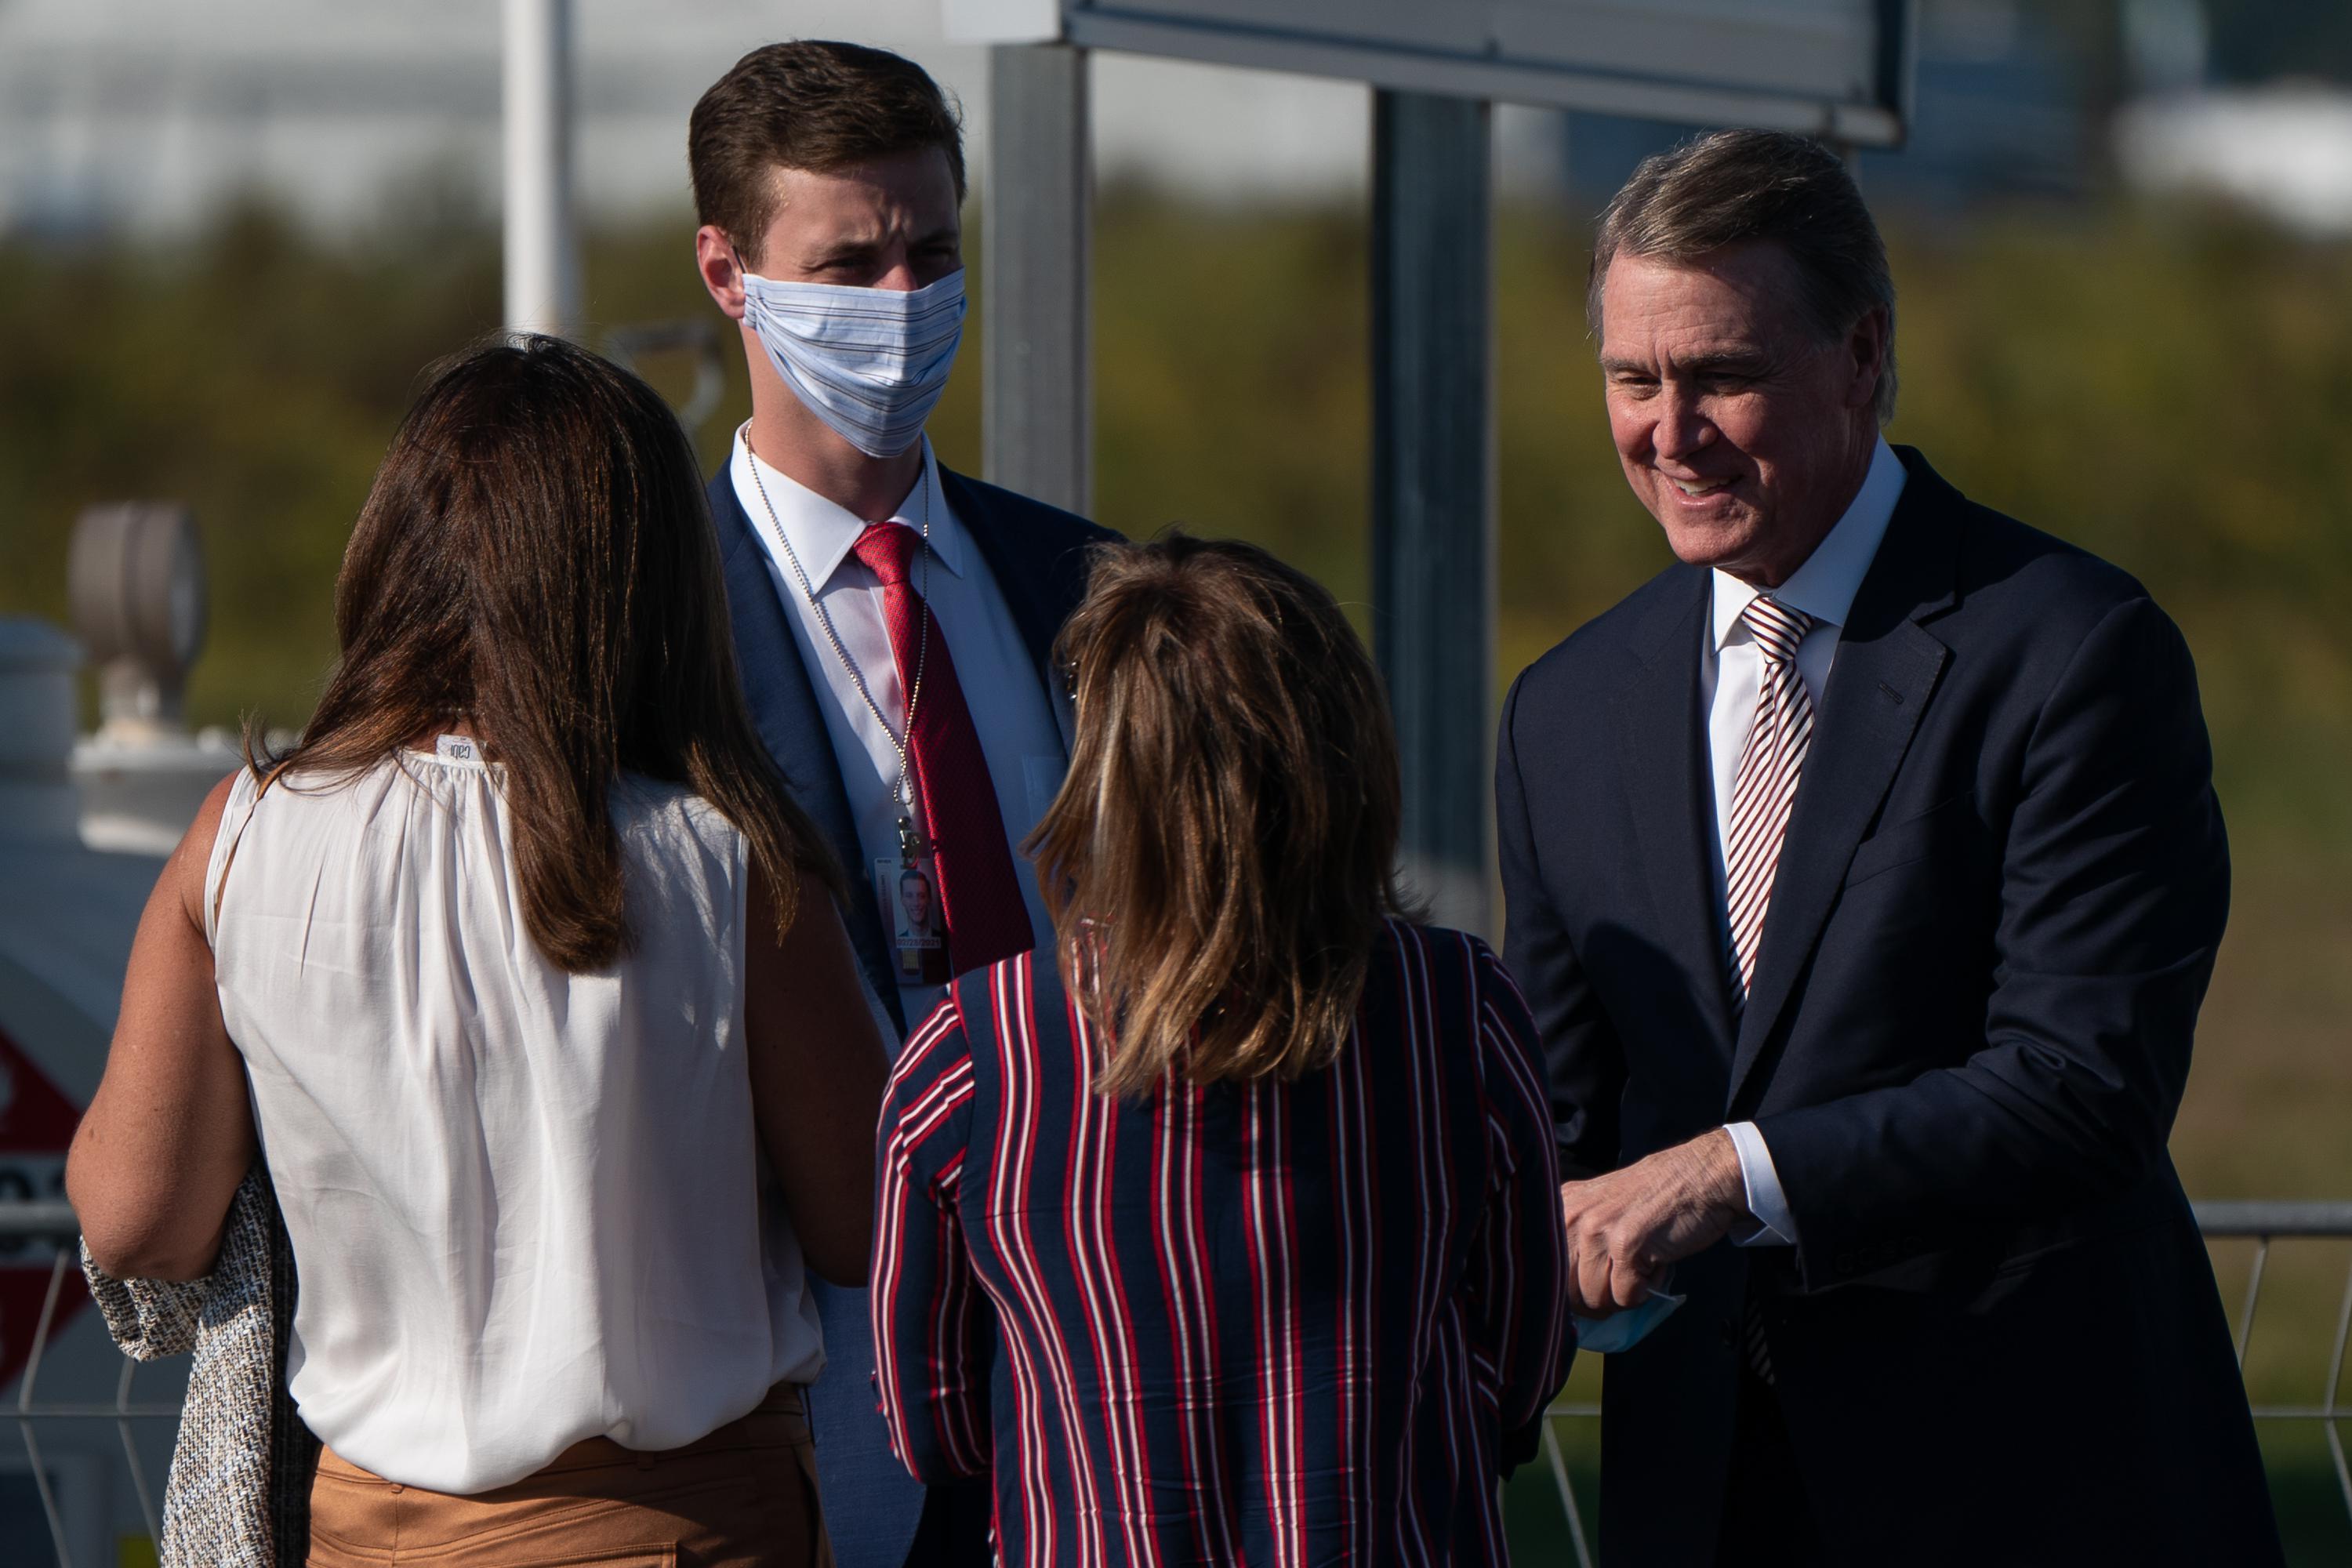 A man without a mask talks with two women while a man stands at his side in a face mask.